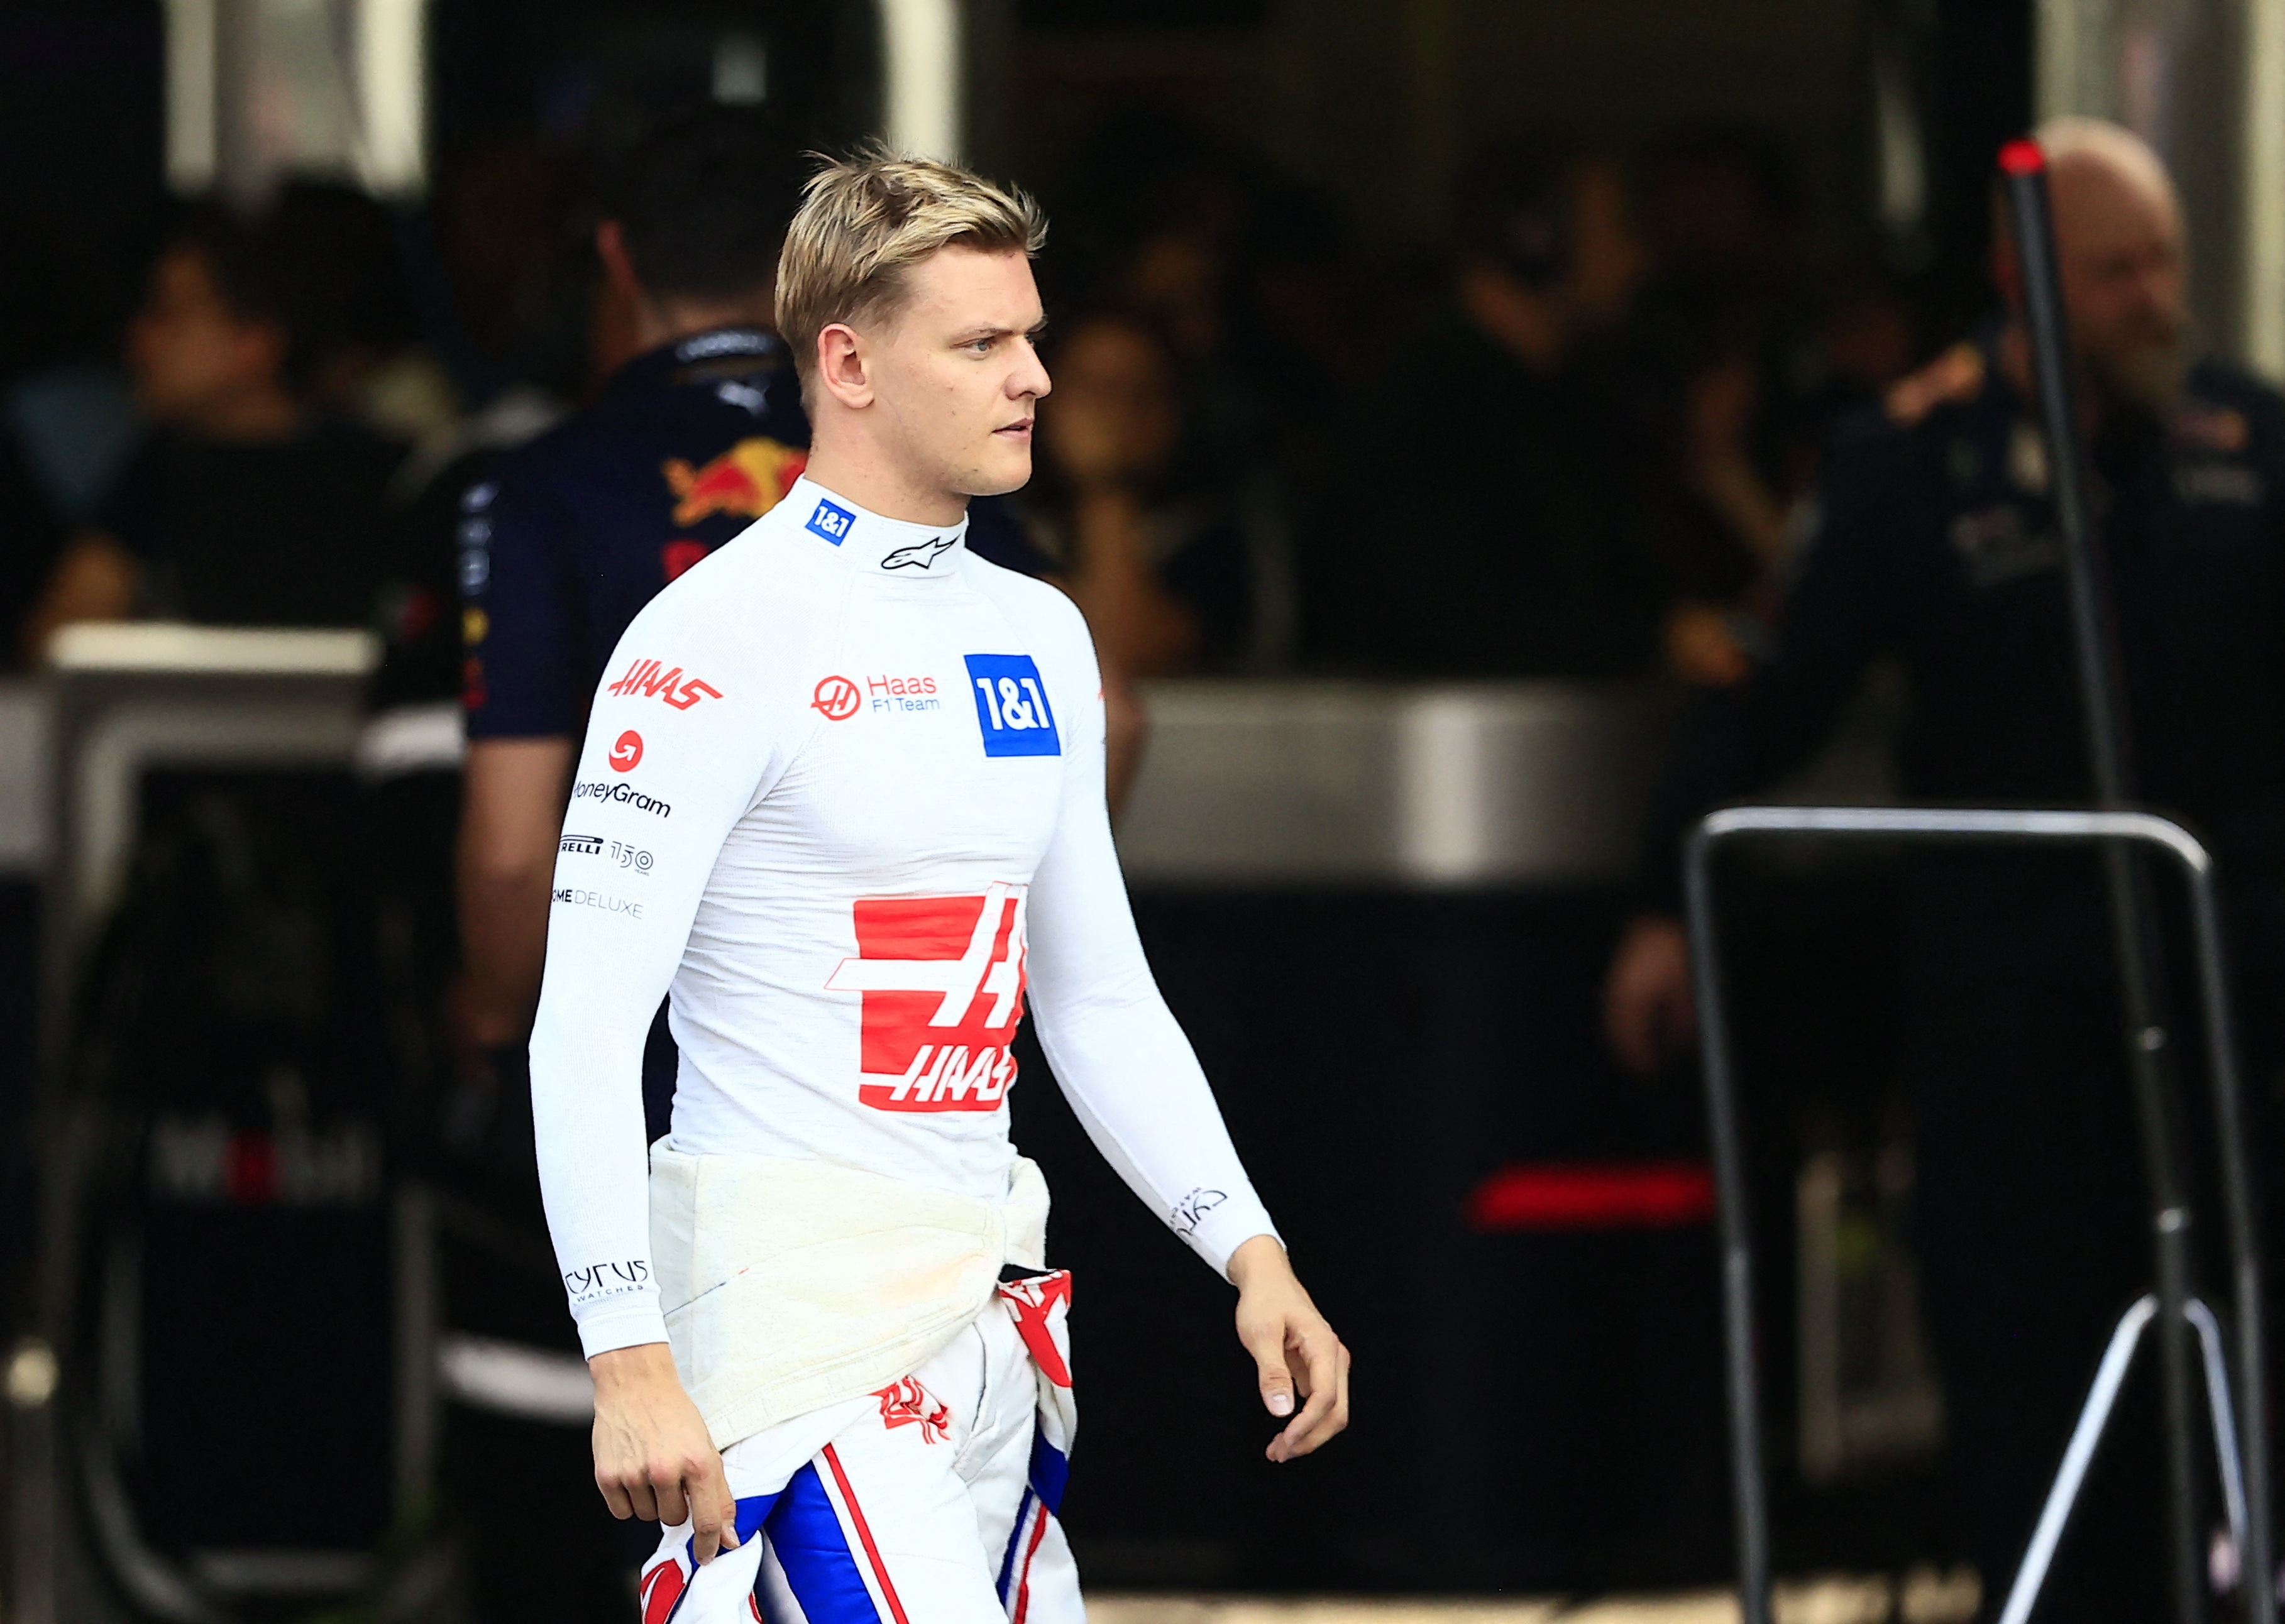 Formula 1: CHECK why Haas cut short Mick Schumacher's honeymoon on F1 grid, REASON why Nico Hulkenberg will make SHOCK return to pits in 2023 - DETAILS here